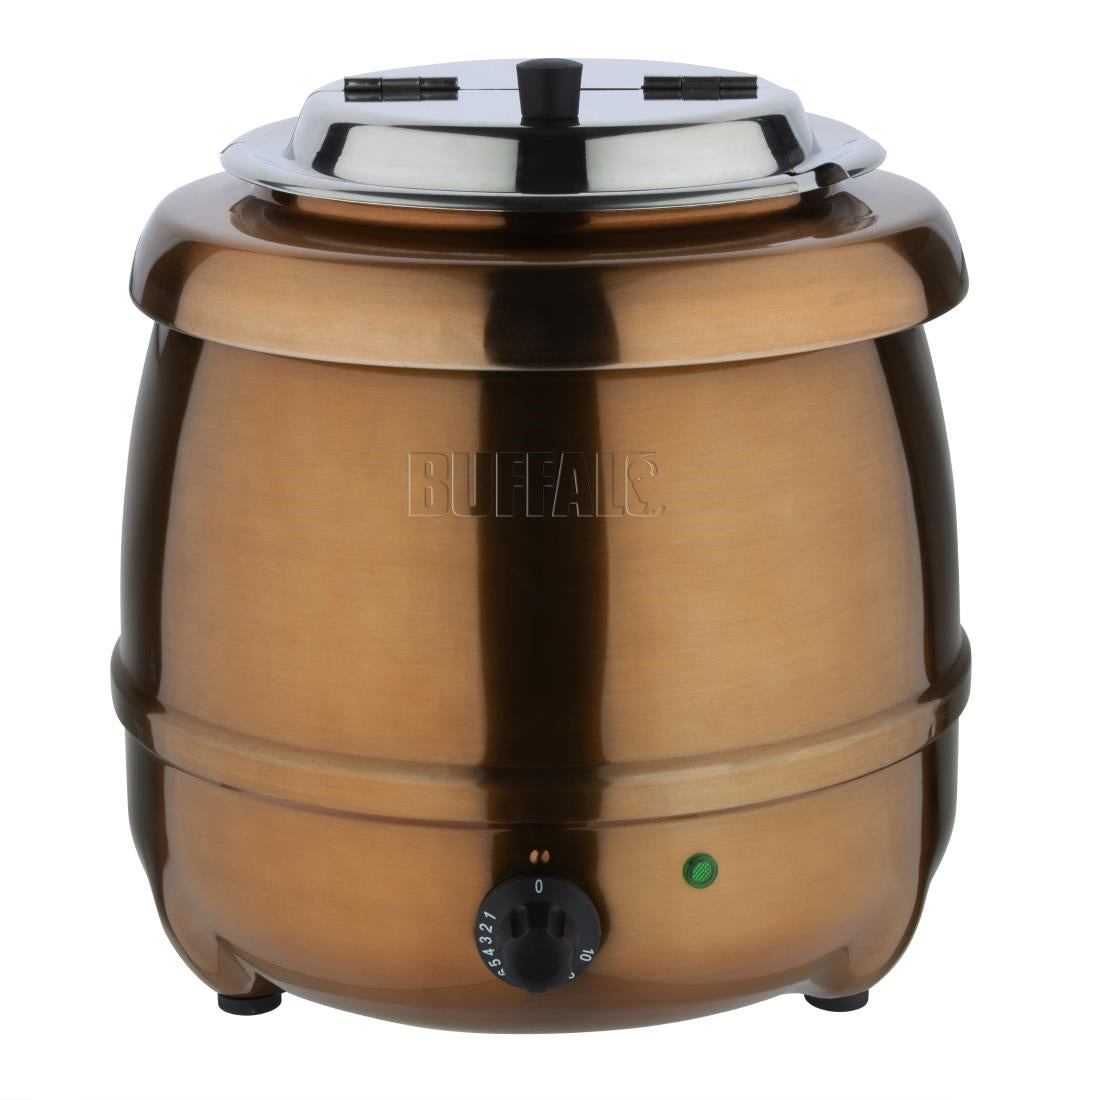 CP851 Buffalo Soup Kettle Copper Finish JD Catering Equipment Solutions Ltd